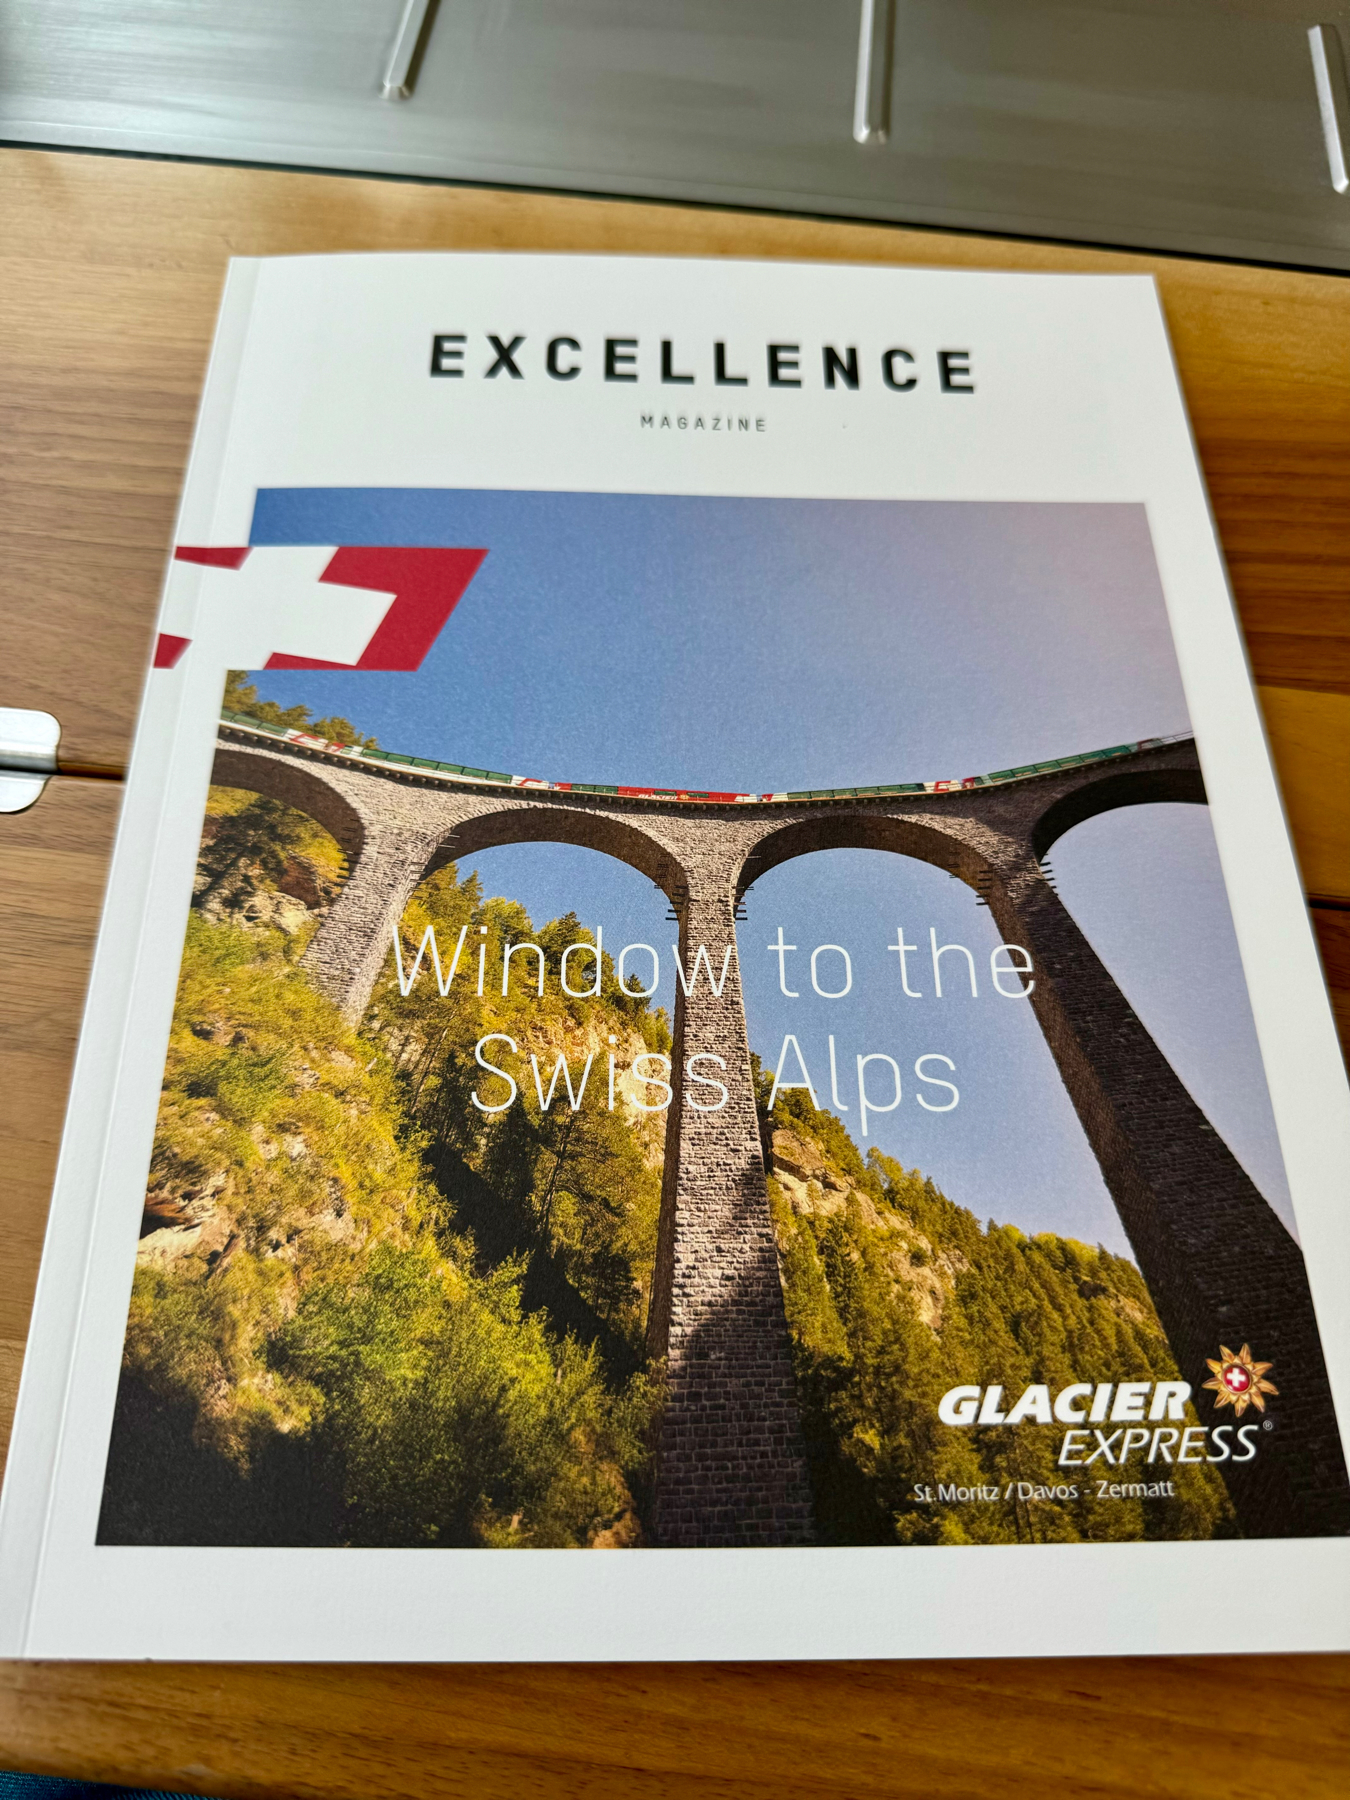 A magazine cover titled “EXCELLENCE MAGAZINE” featuring a photograph of a stone bridge with a train crossing, with the caption “Window to the Swiss Alps” and the Glacier Express logo, indicating routes from St. Moritz/Davos - Zermatt.